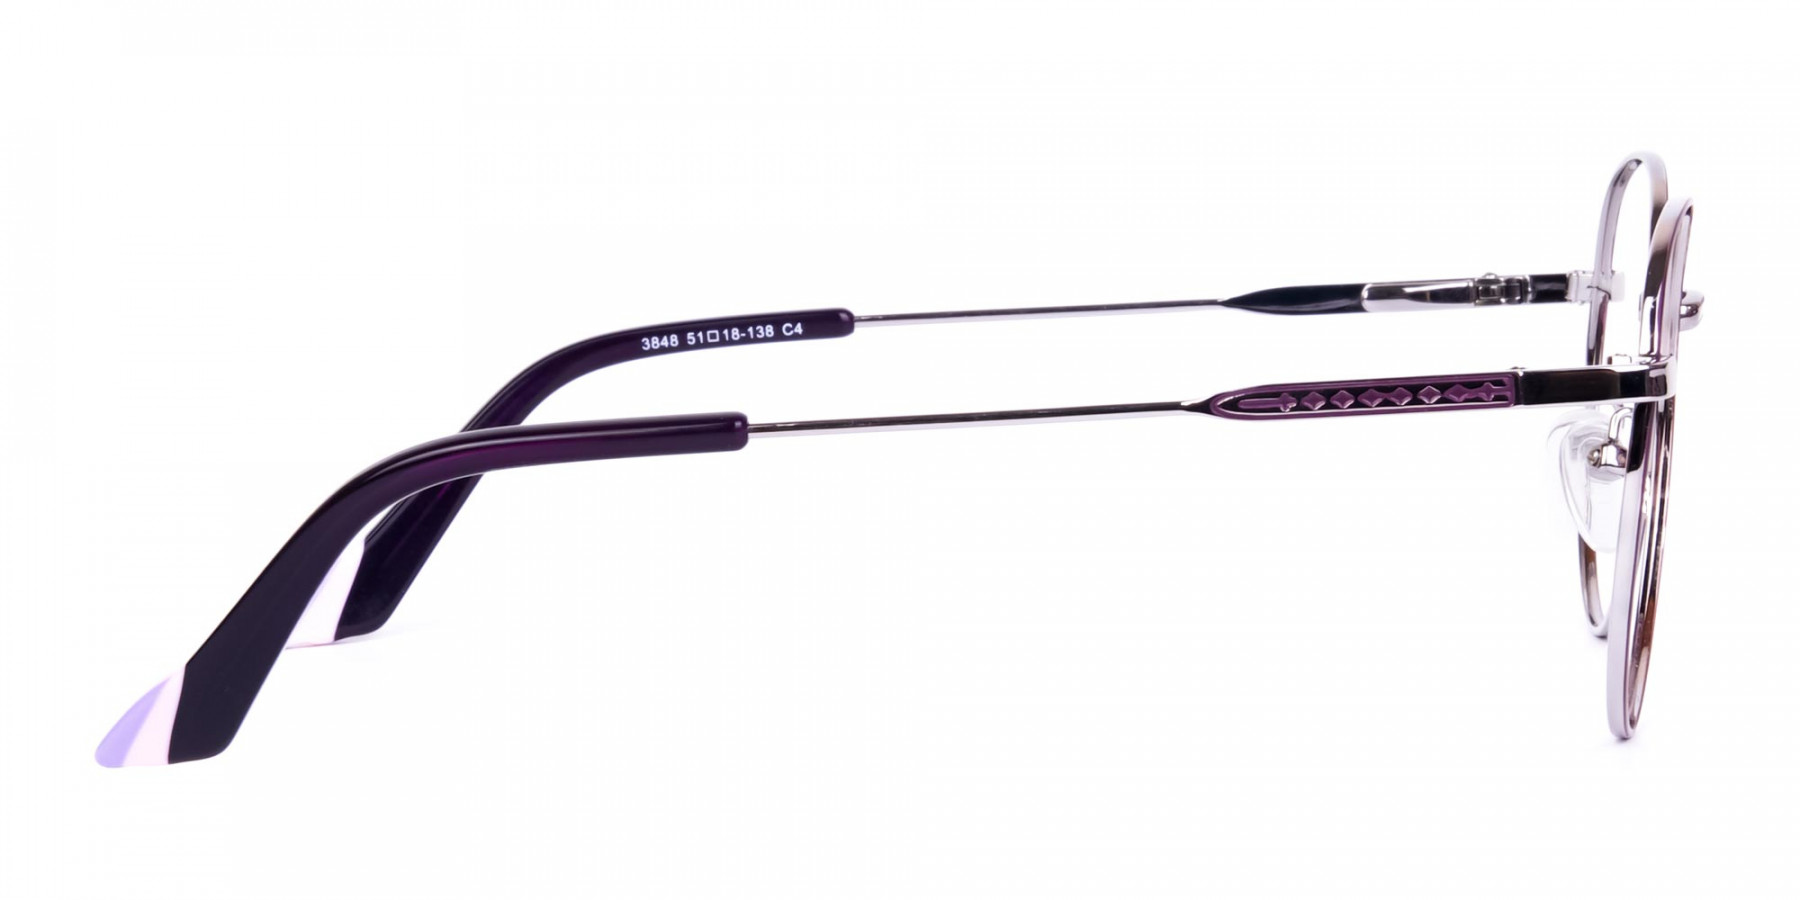 Purple-and-Silver-Metal-Round-Glasses-